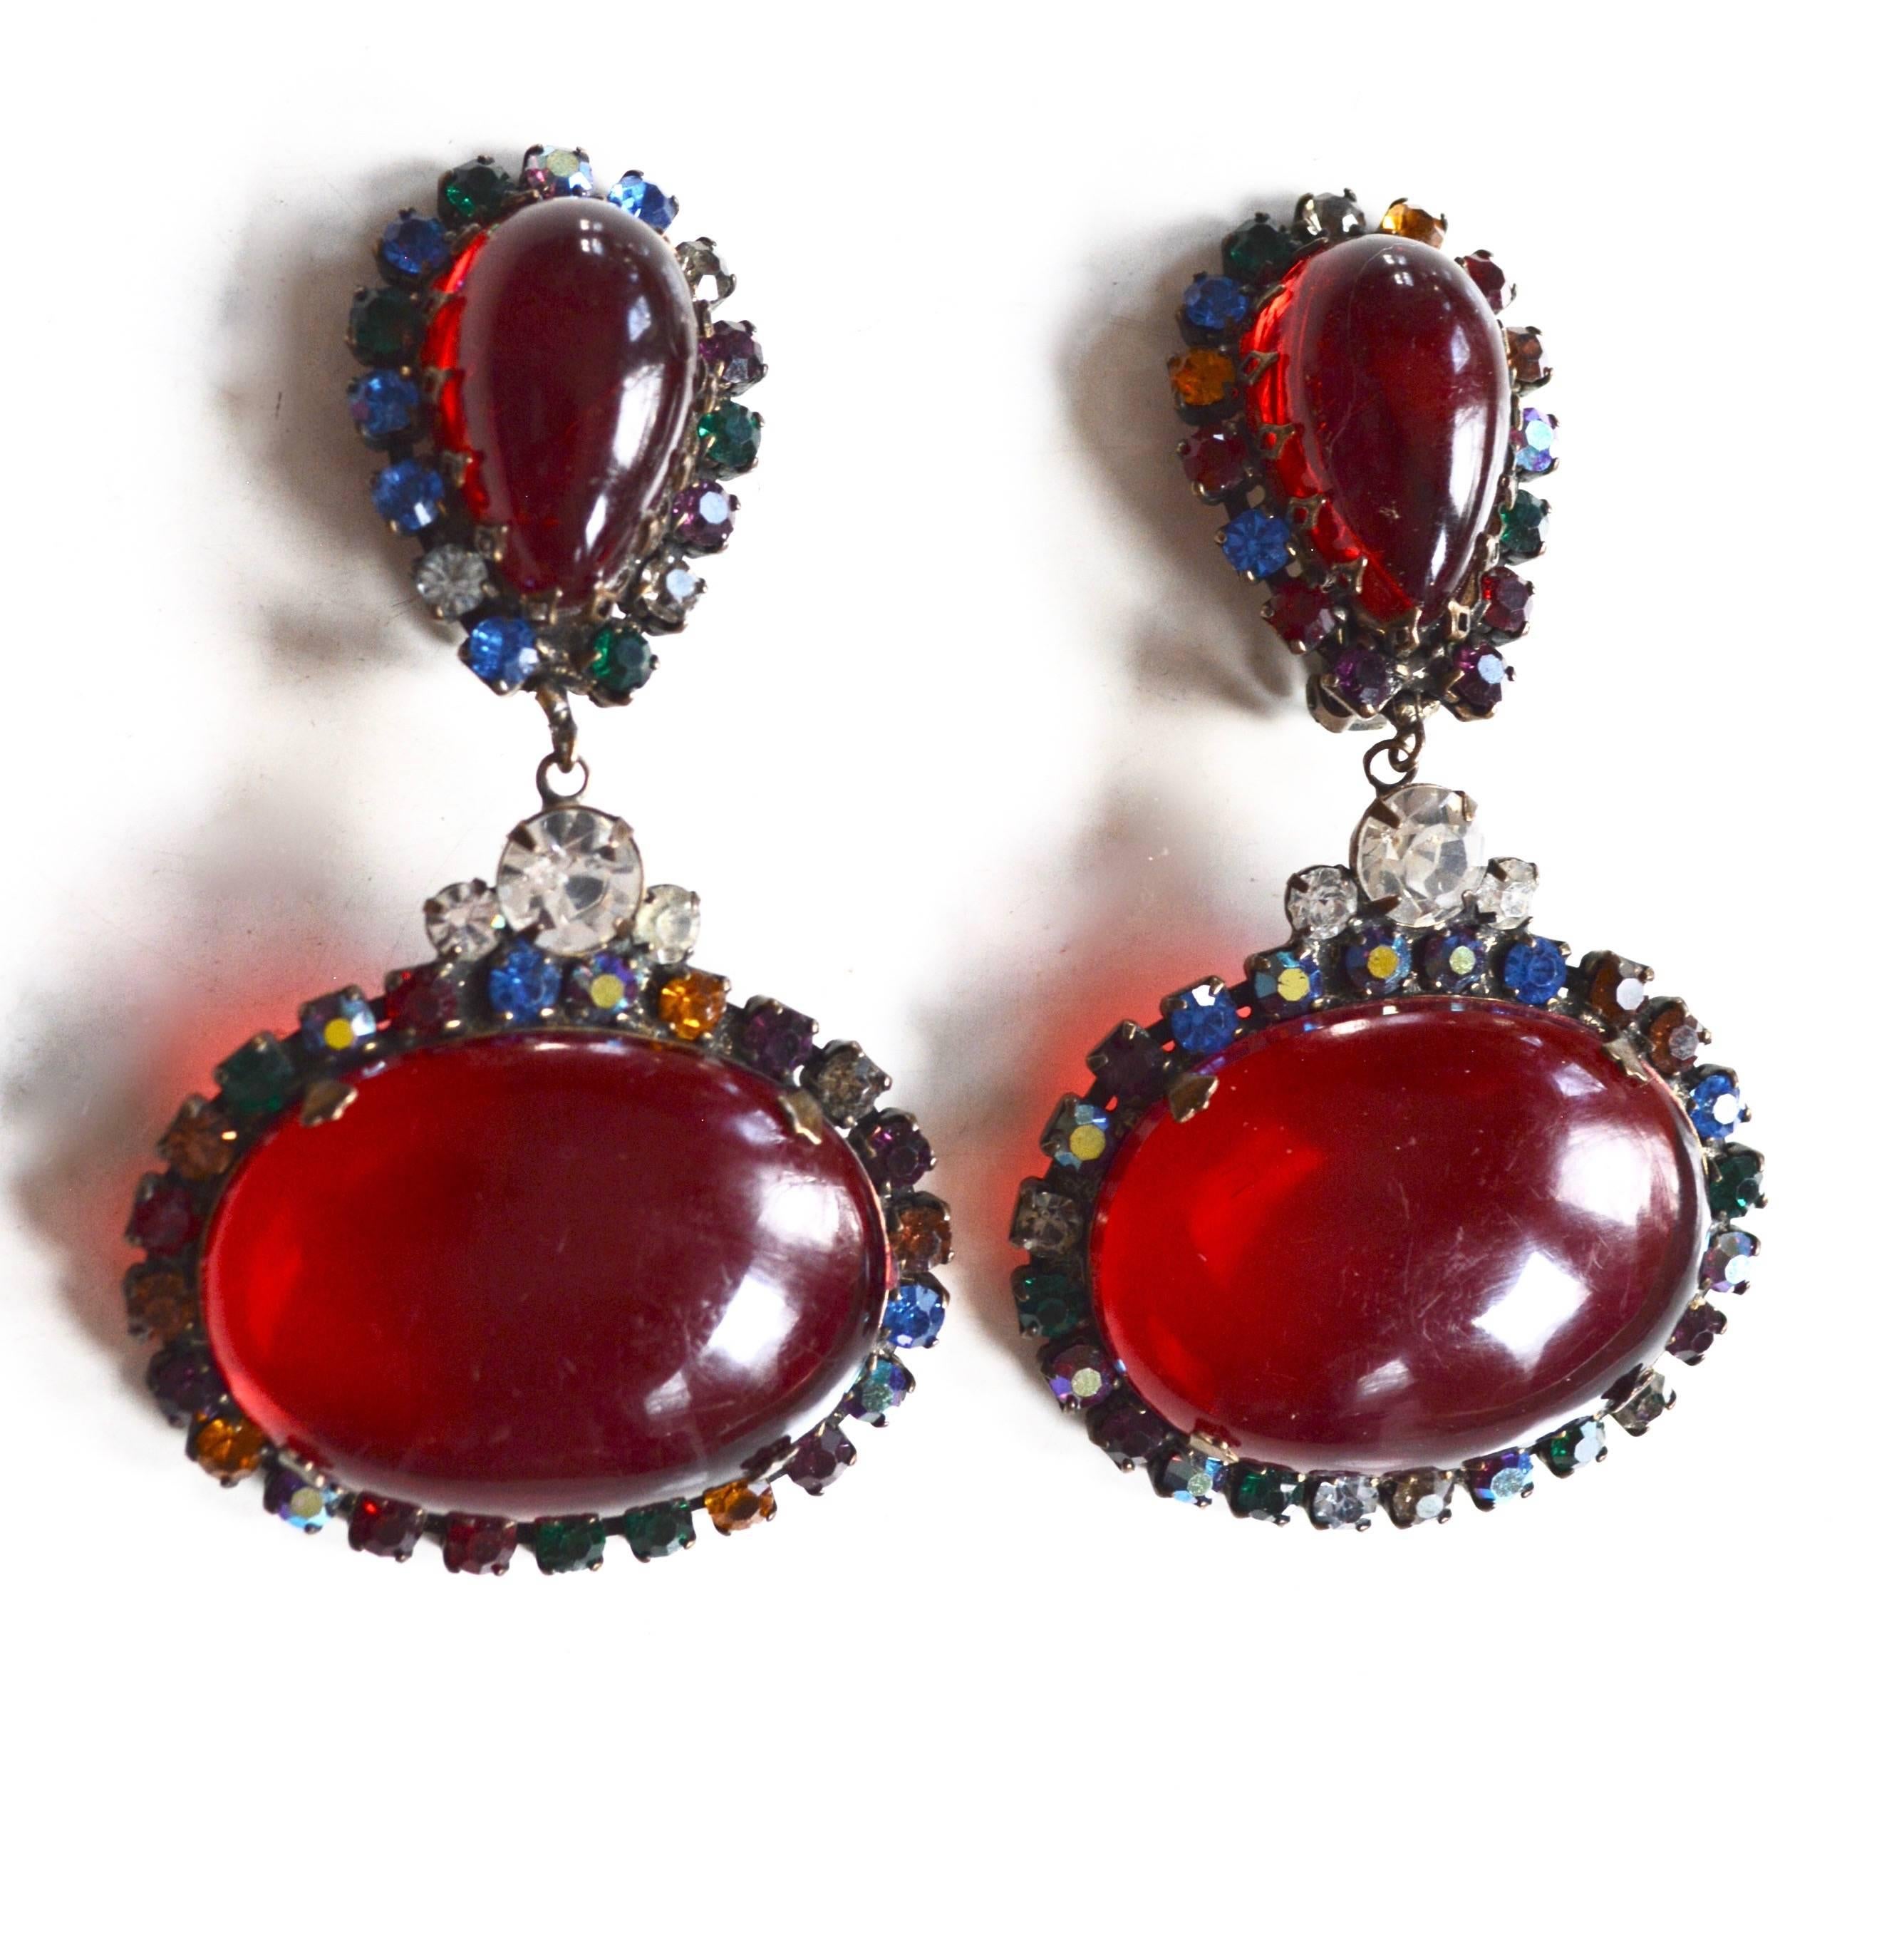 Rare cherry red large rhinestone and red cabochon earrings. Signed by Kenneth Jay Lane in the early signature style. These almost have the feel of bakelite, but I did not test them. Great look! Mild overall surface wear, bronze finish. Reside from a